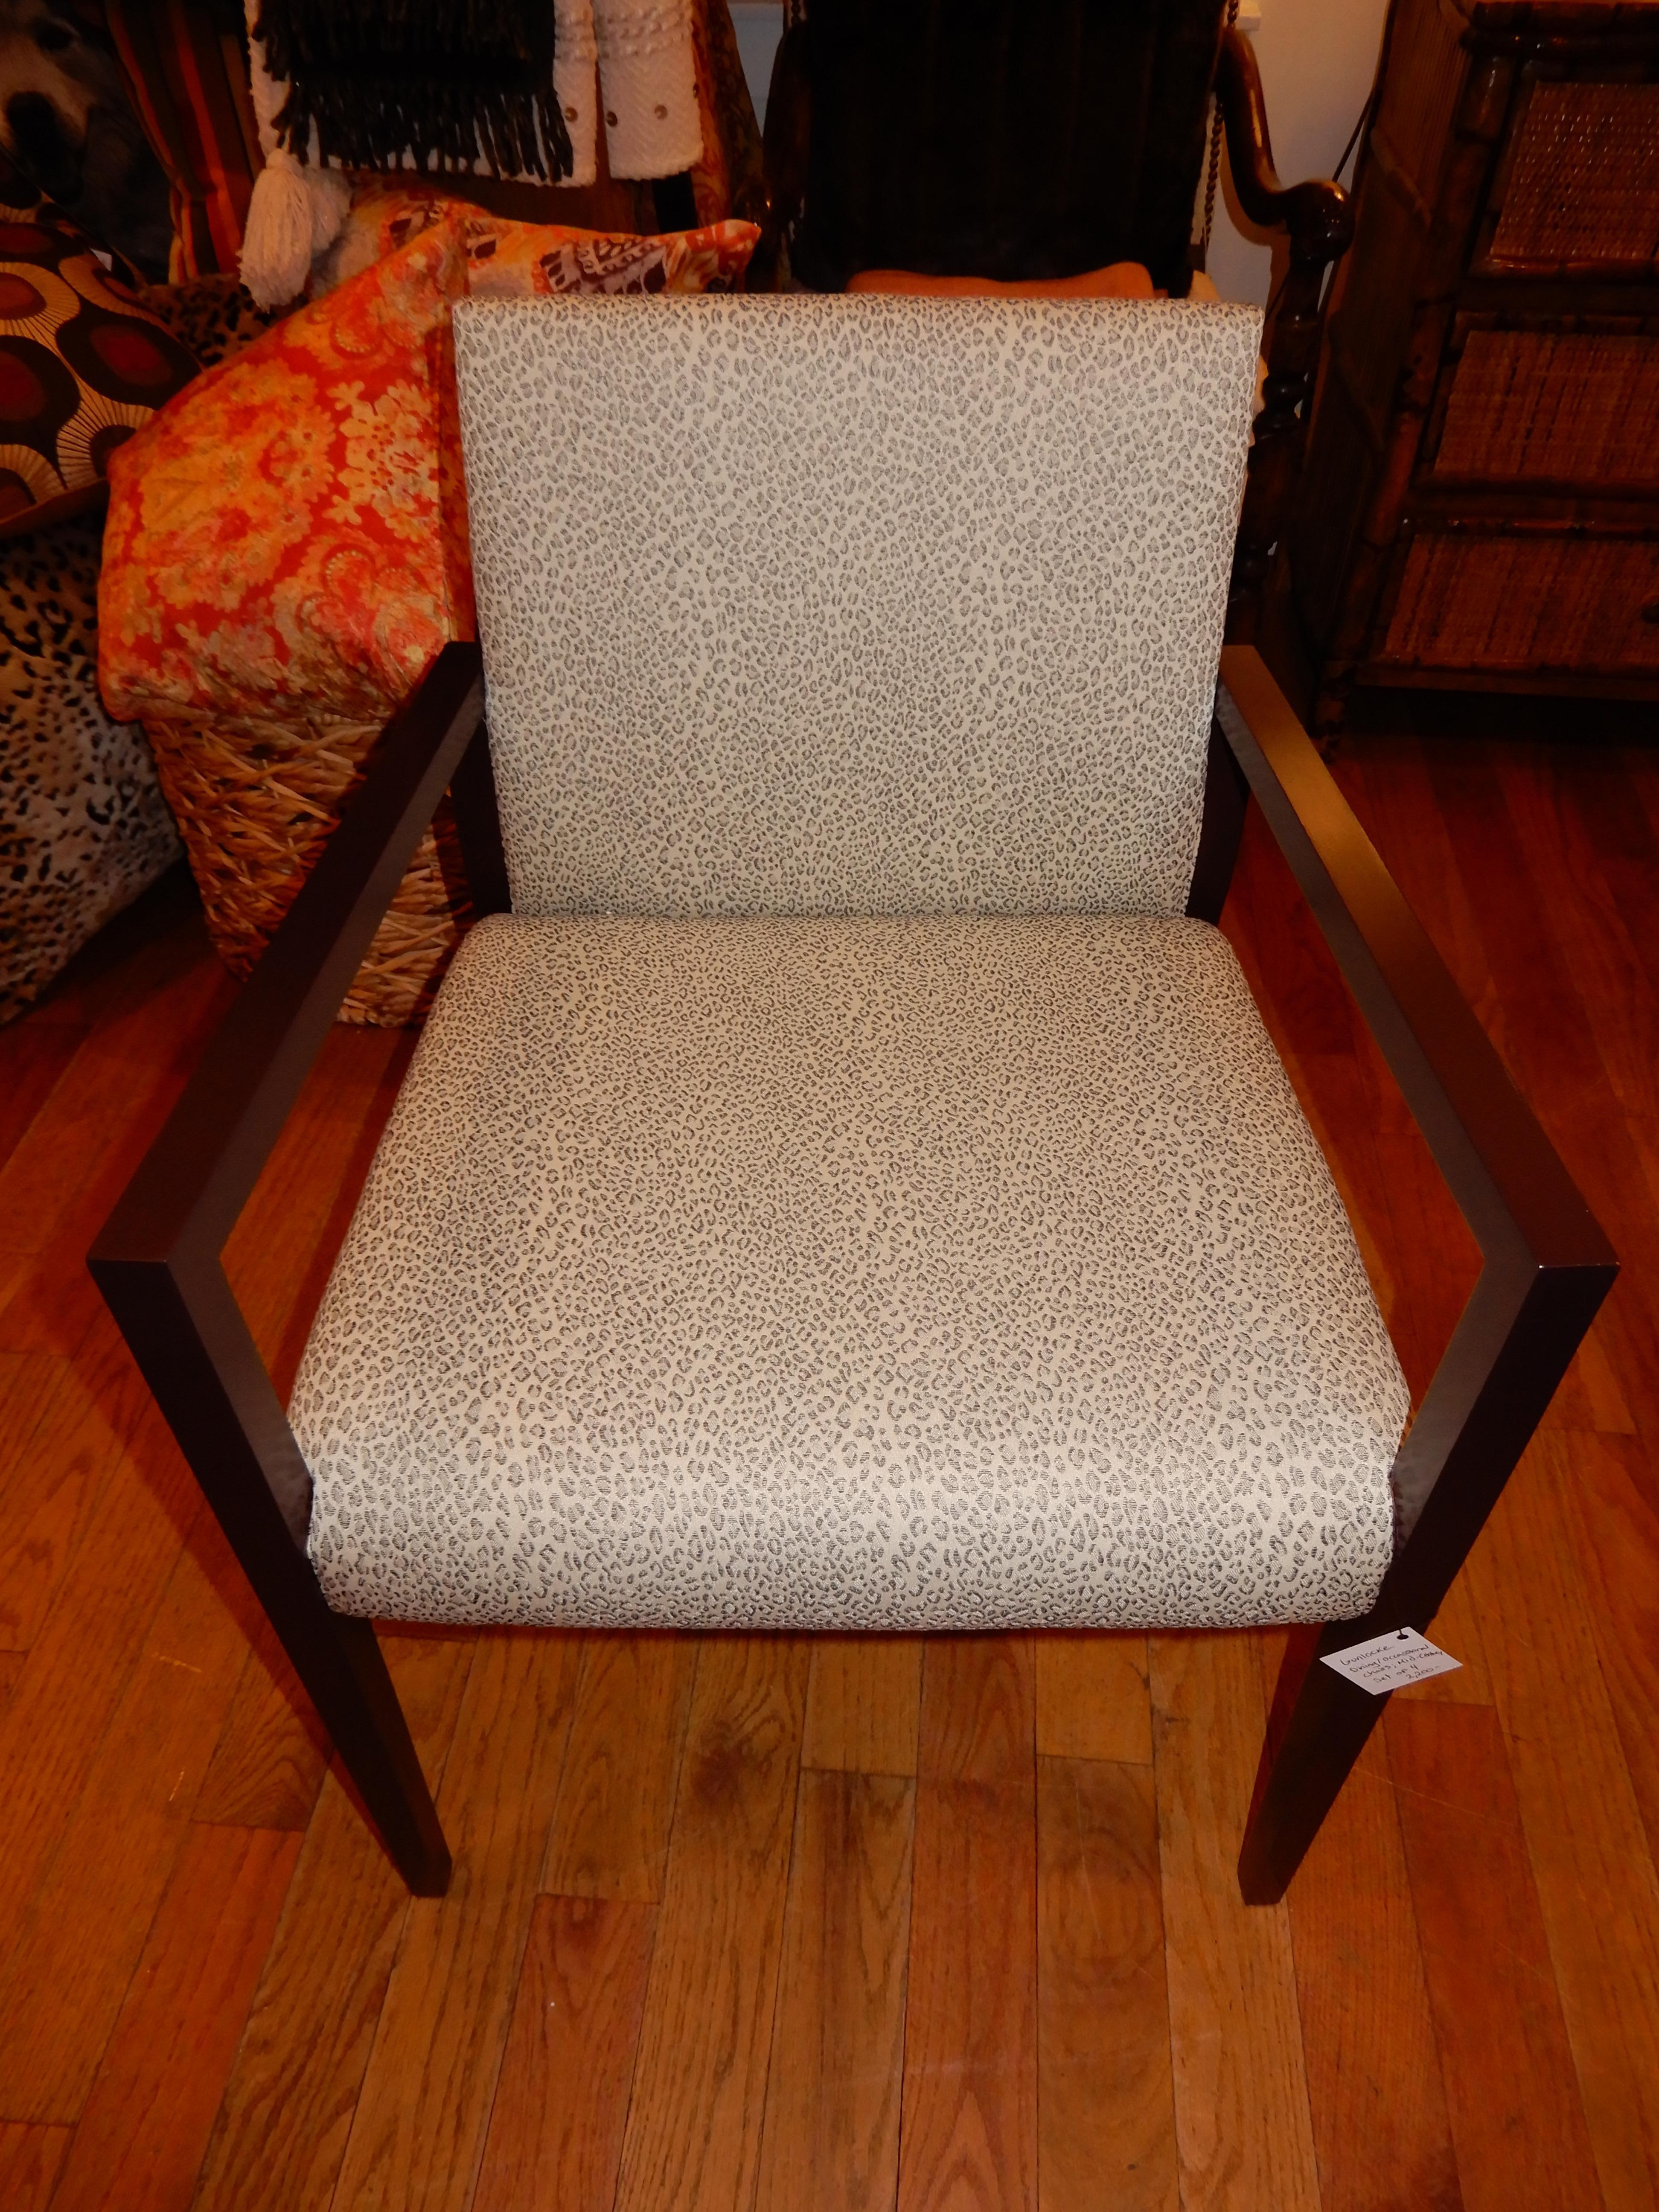 Two Midcentury American Made Armchairs by Gunlocke Co after Risom In Excellent Condition For Sale In Bellport, NY